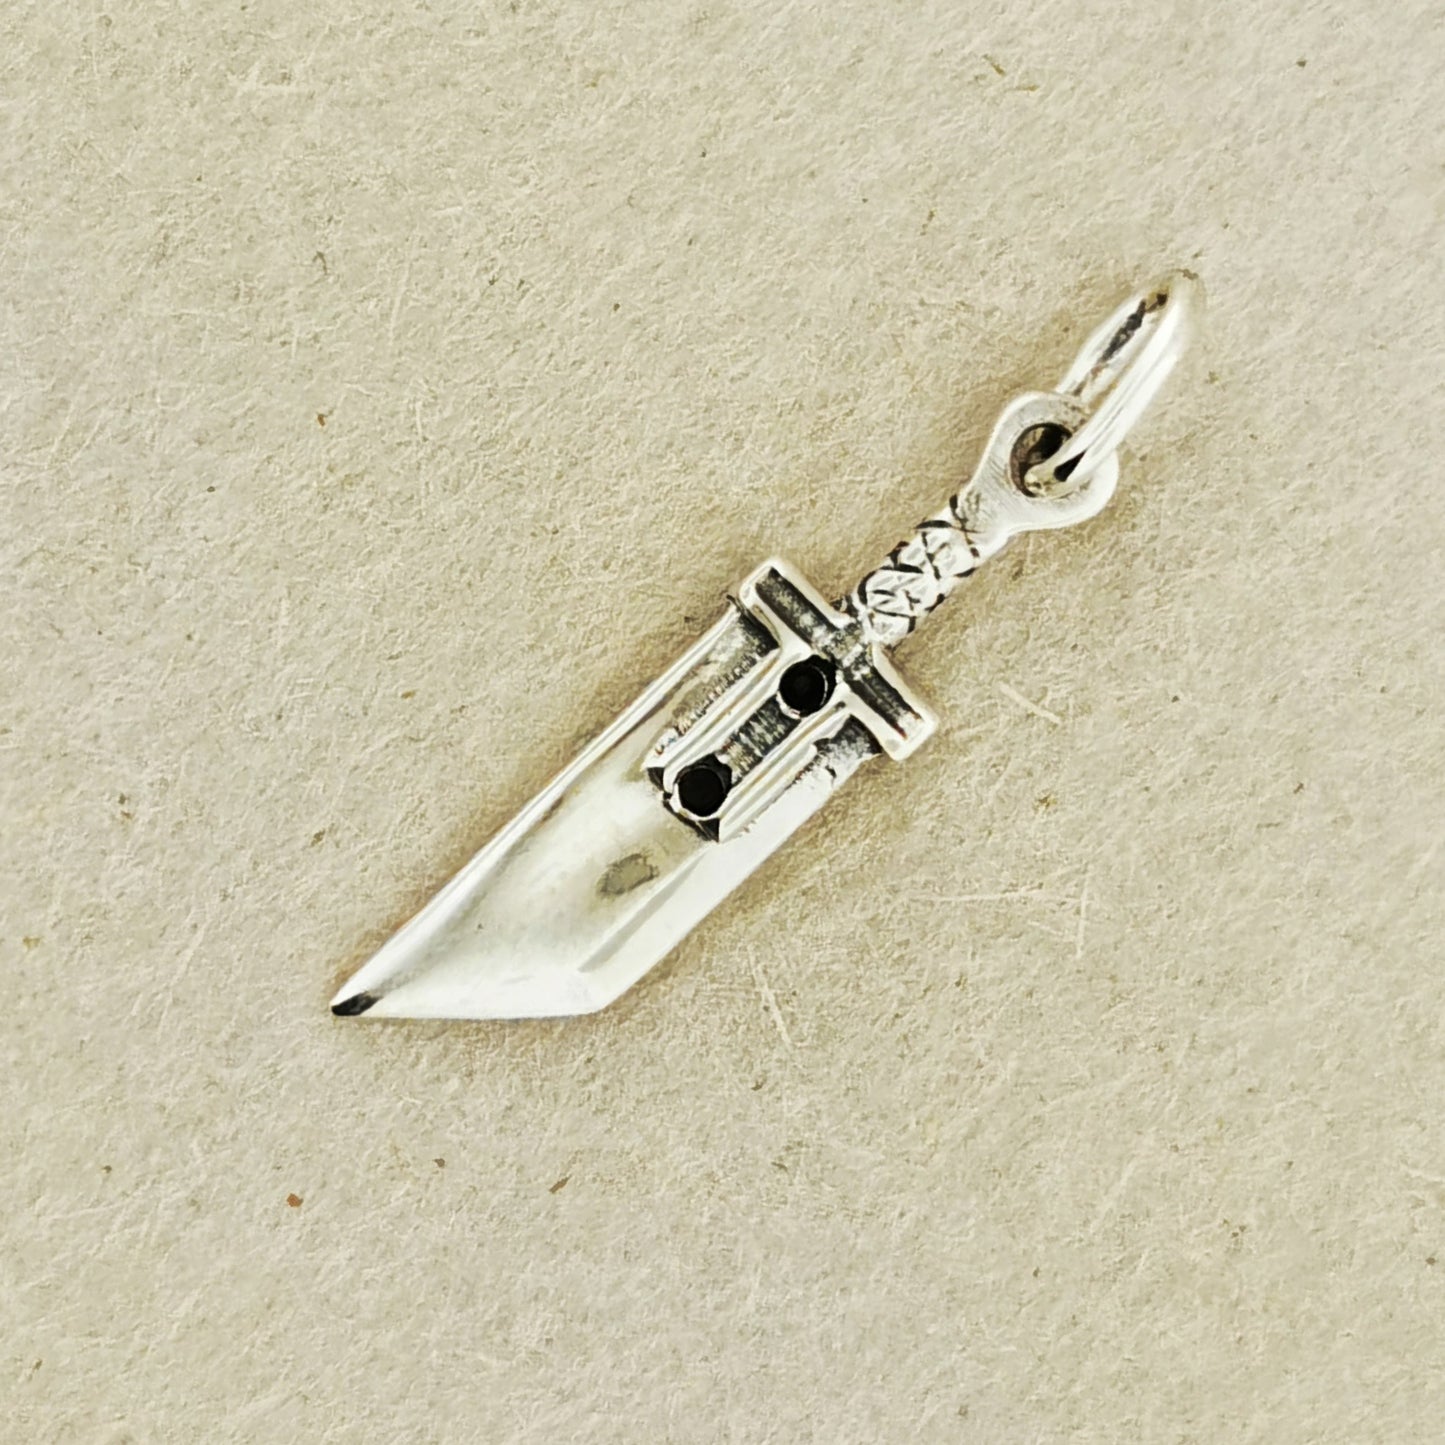 FF7 Small Buster Sword Charm in Sterling Silver or Antique Bronze, FFVII Sword Charm, FF7 Cloud Strife Sword Pendant, FFVII Buster Sword, Buster Sword Pendant, Gamer Girl Jewelry, Final Fantasy Jewelry, Final Fantasy Cloud Charm, Buster Sword Charm